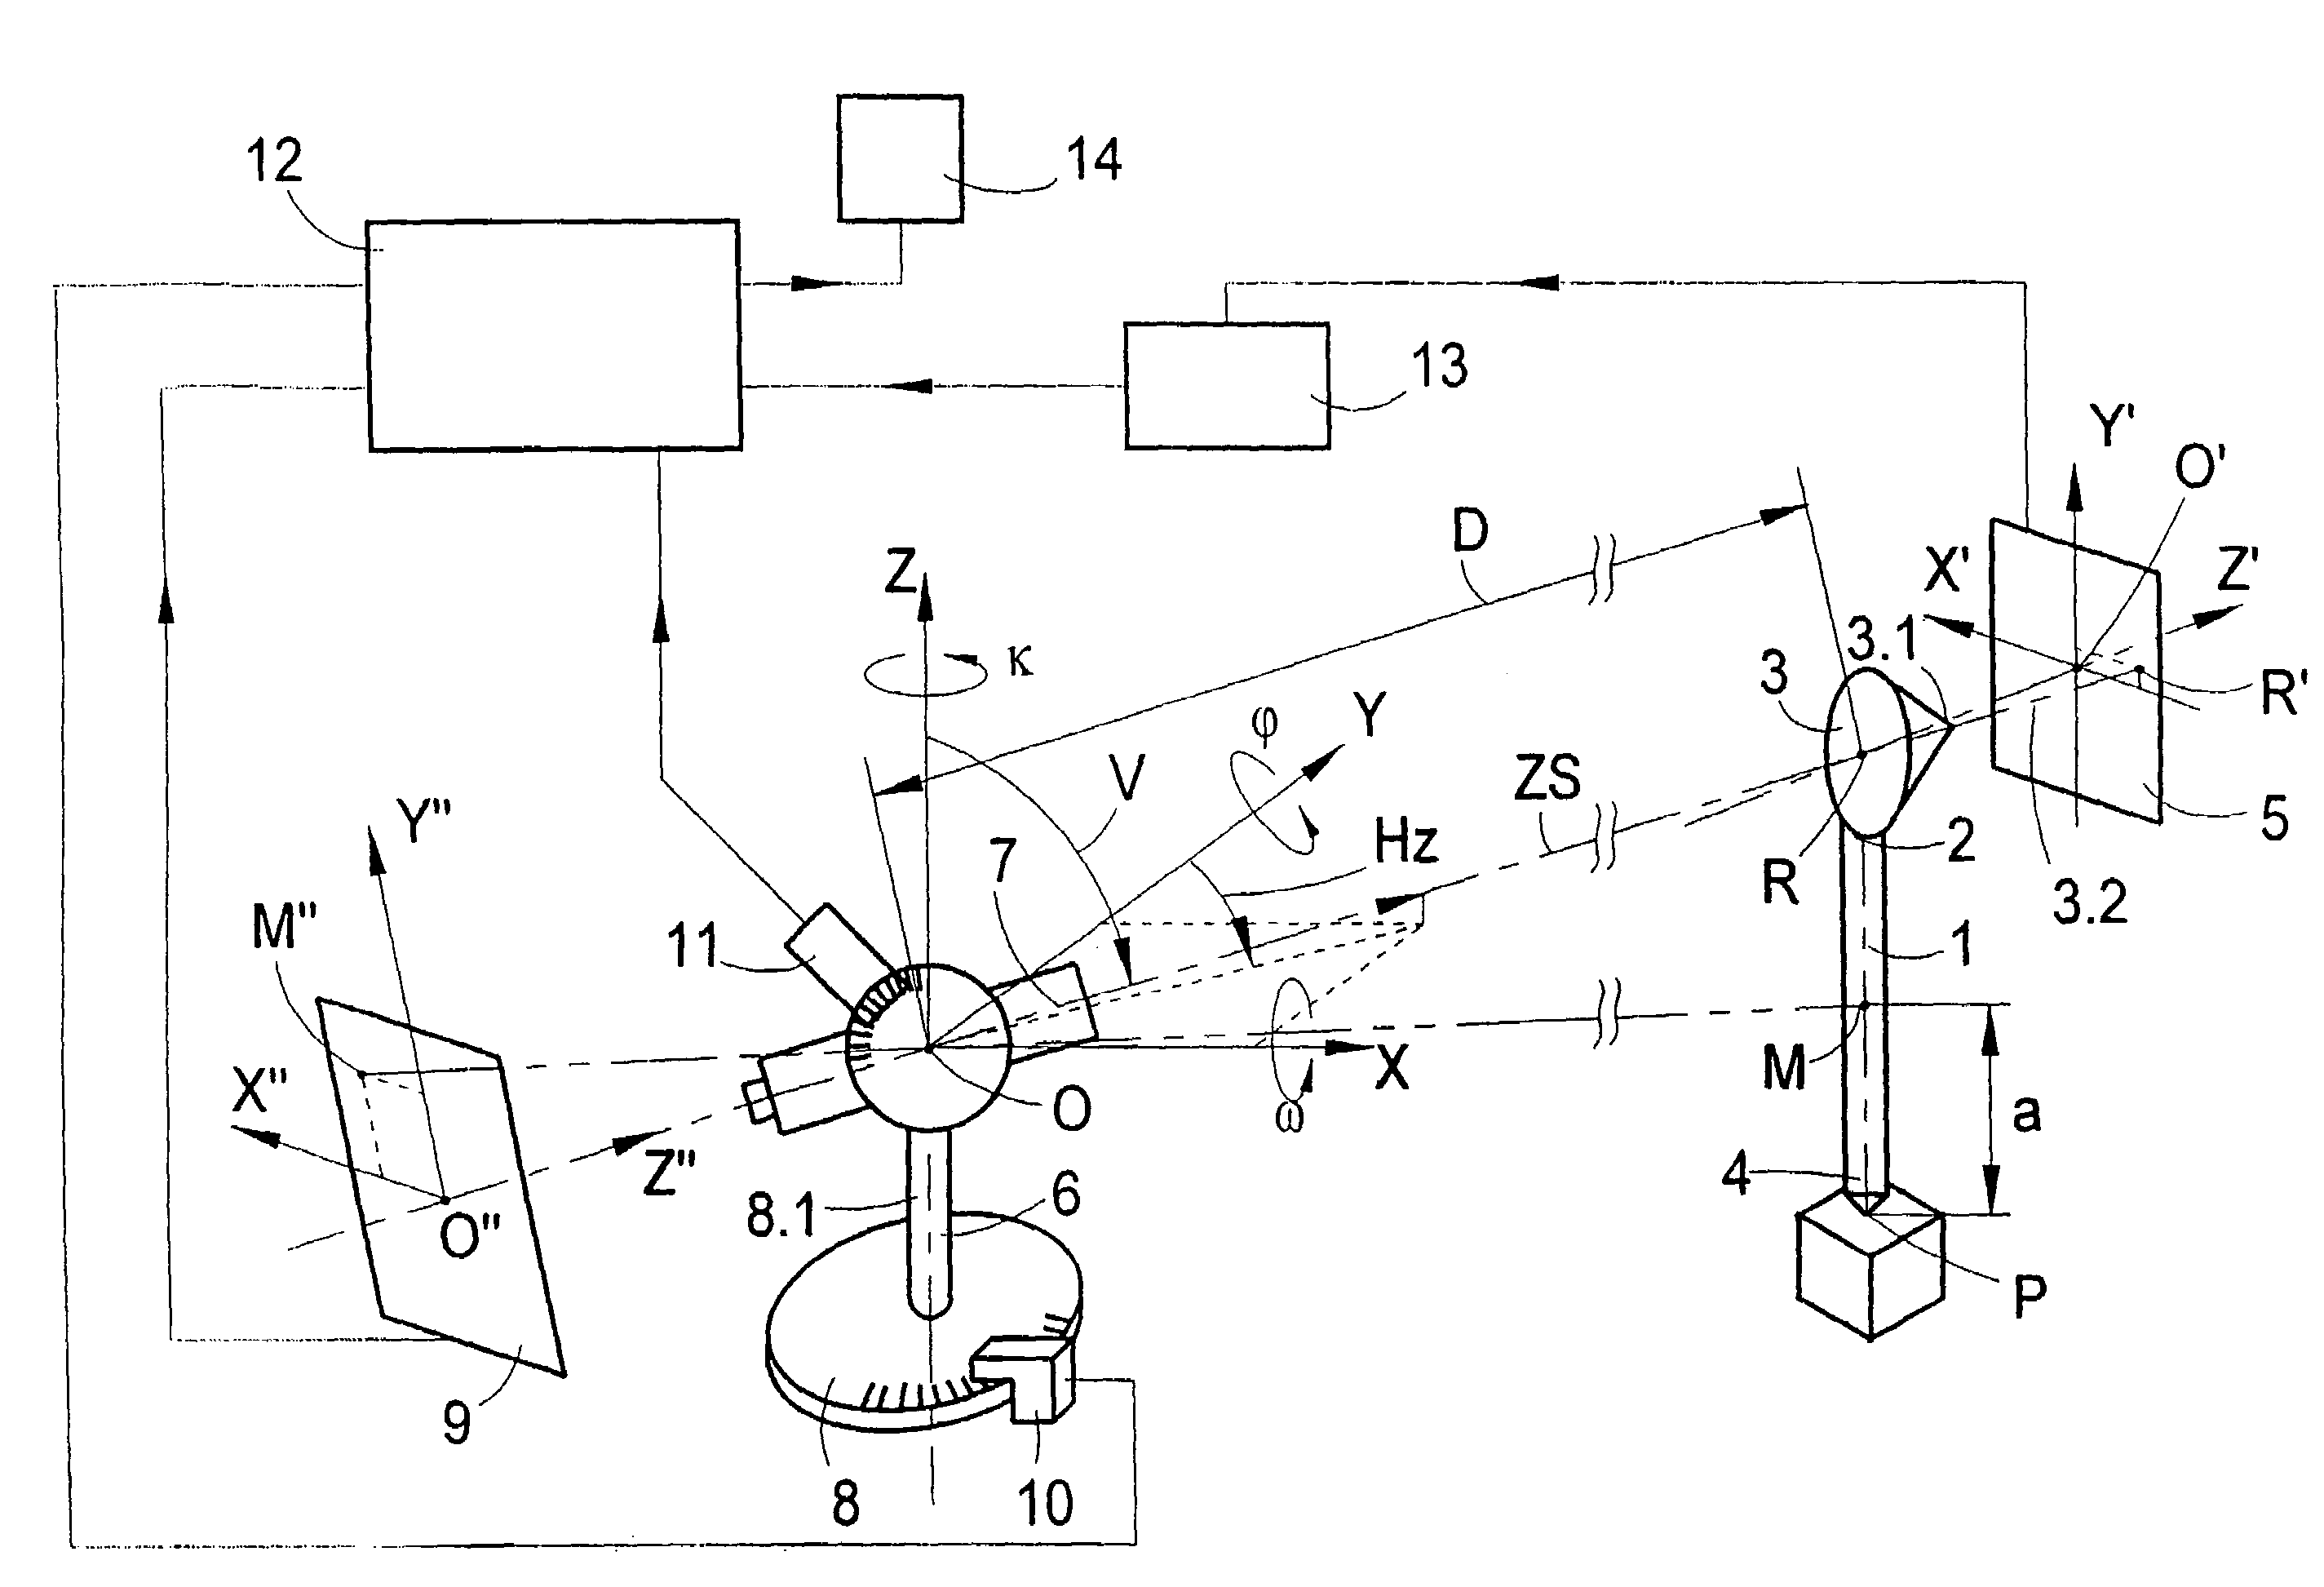 Method for determining the spatial location and position of a reflector rod in relation to a marked ground point